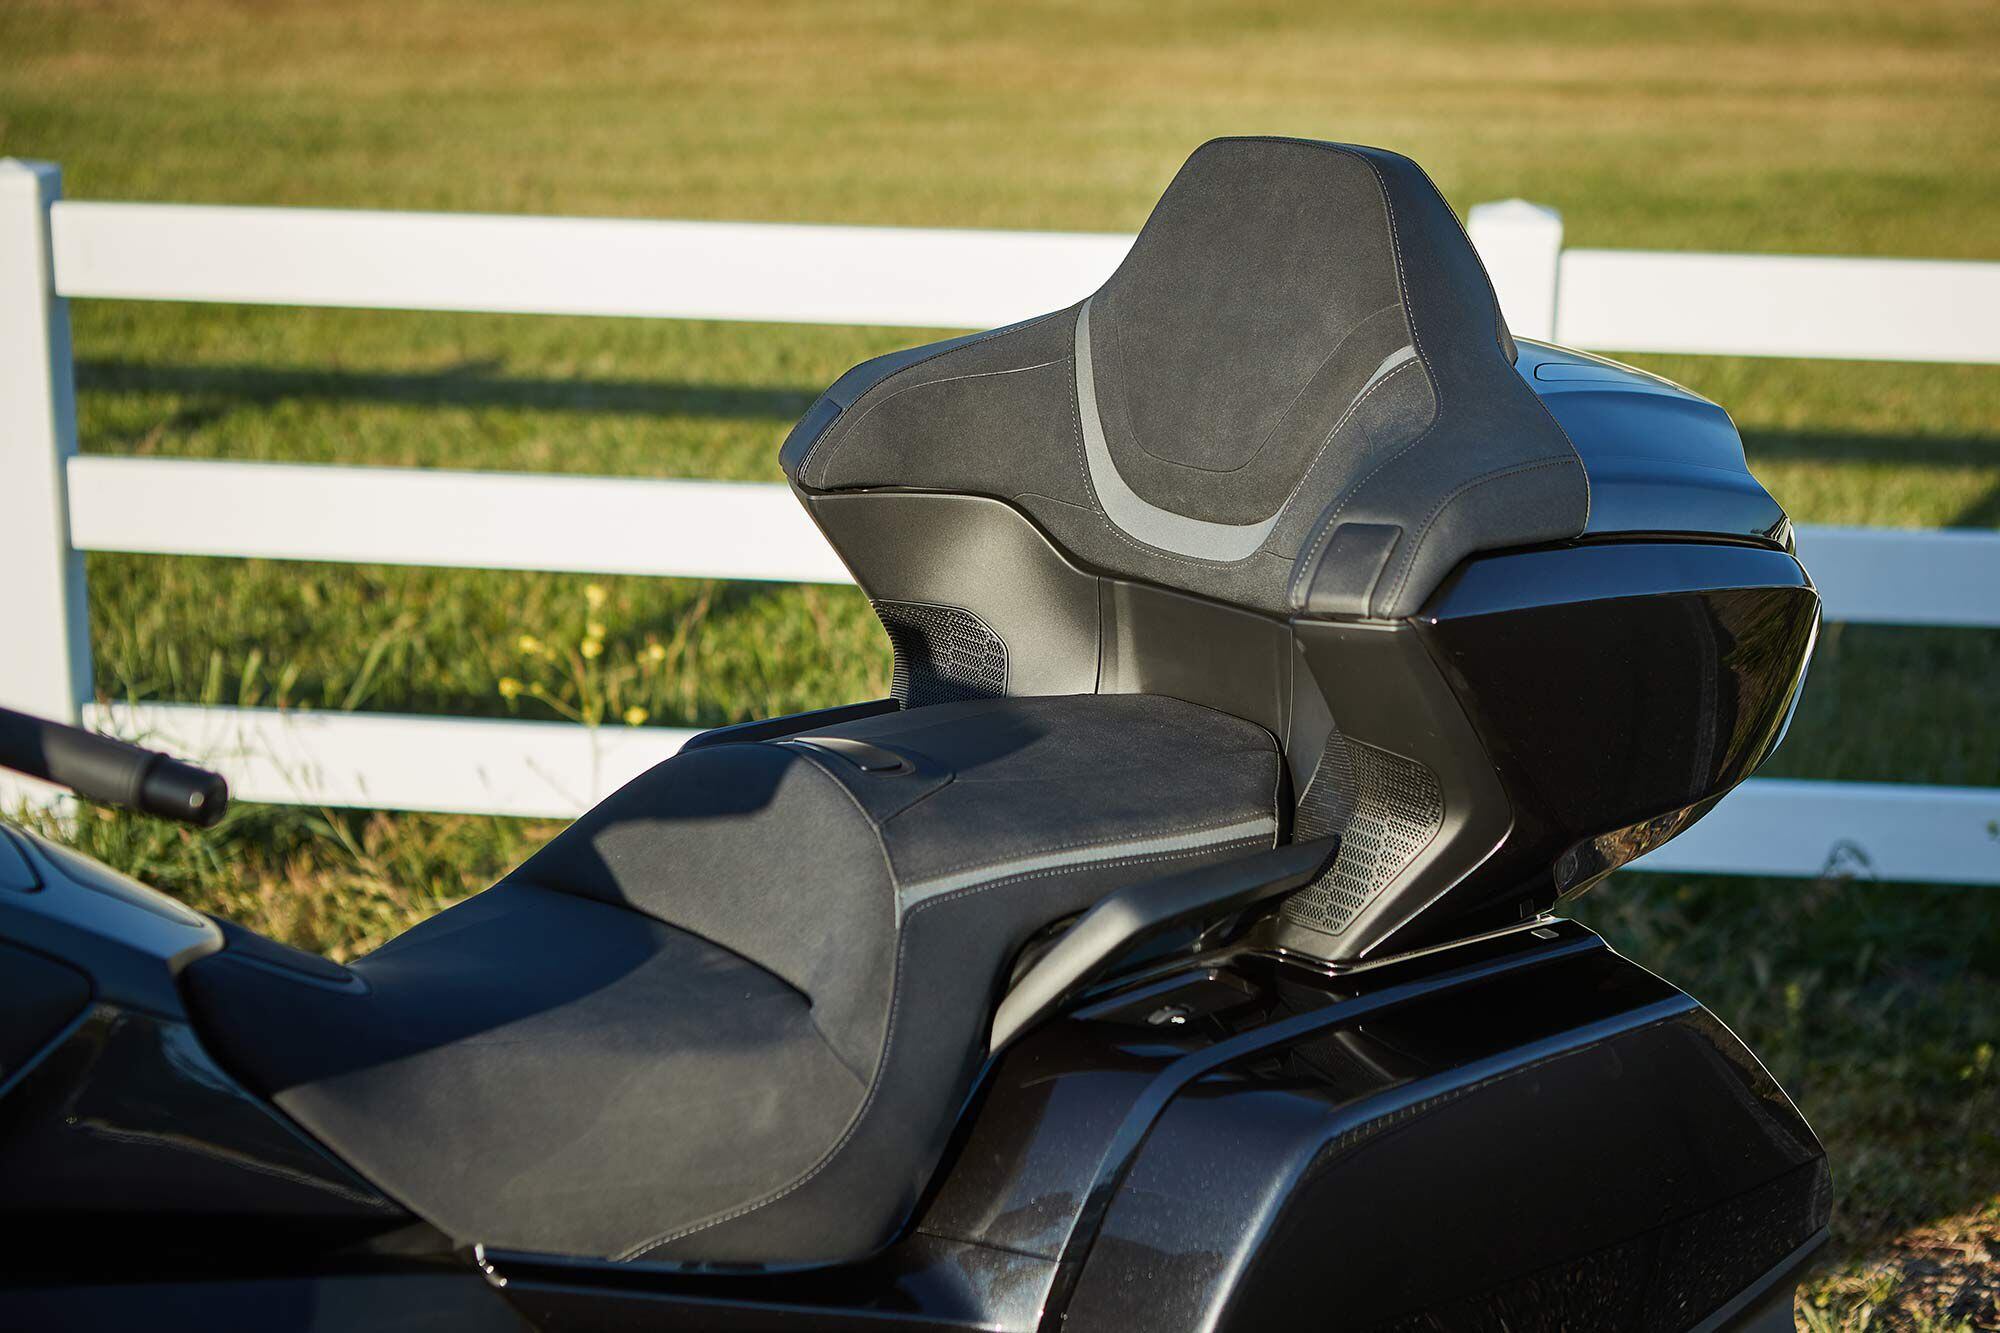 The Gold Wing Tour comes outfitted with a premium suede rider and passenger seat. It’s about as comfy as a motorcycle seat gets and is well-suited to long days in the saddle.